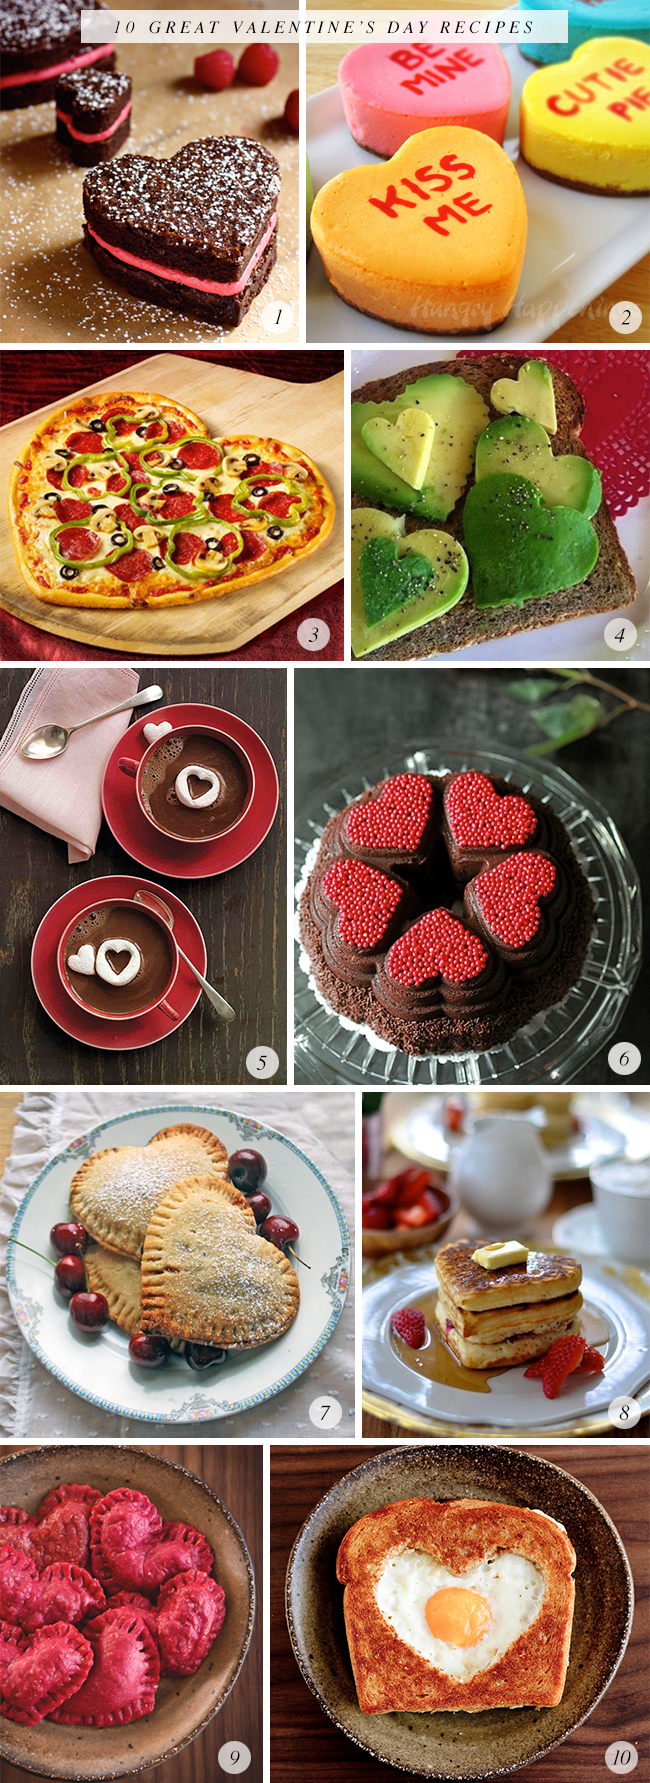 10 Great Valentine's Day Recipes // Bubby and Bean